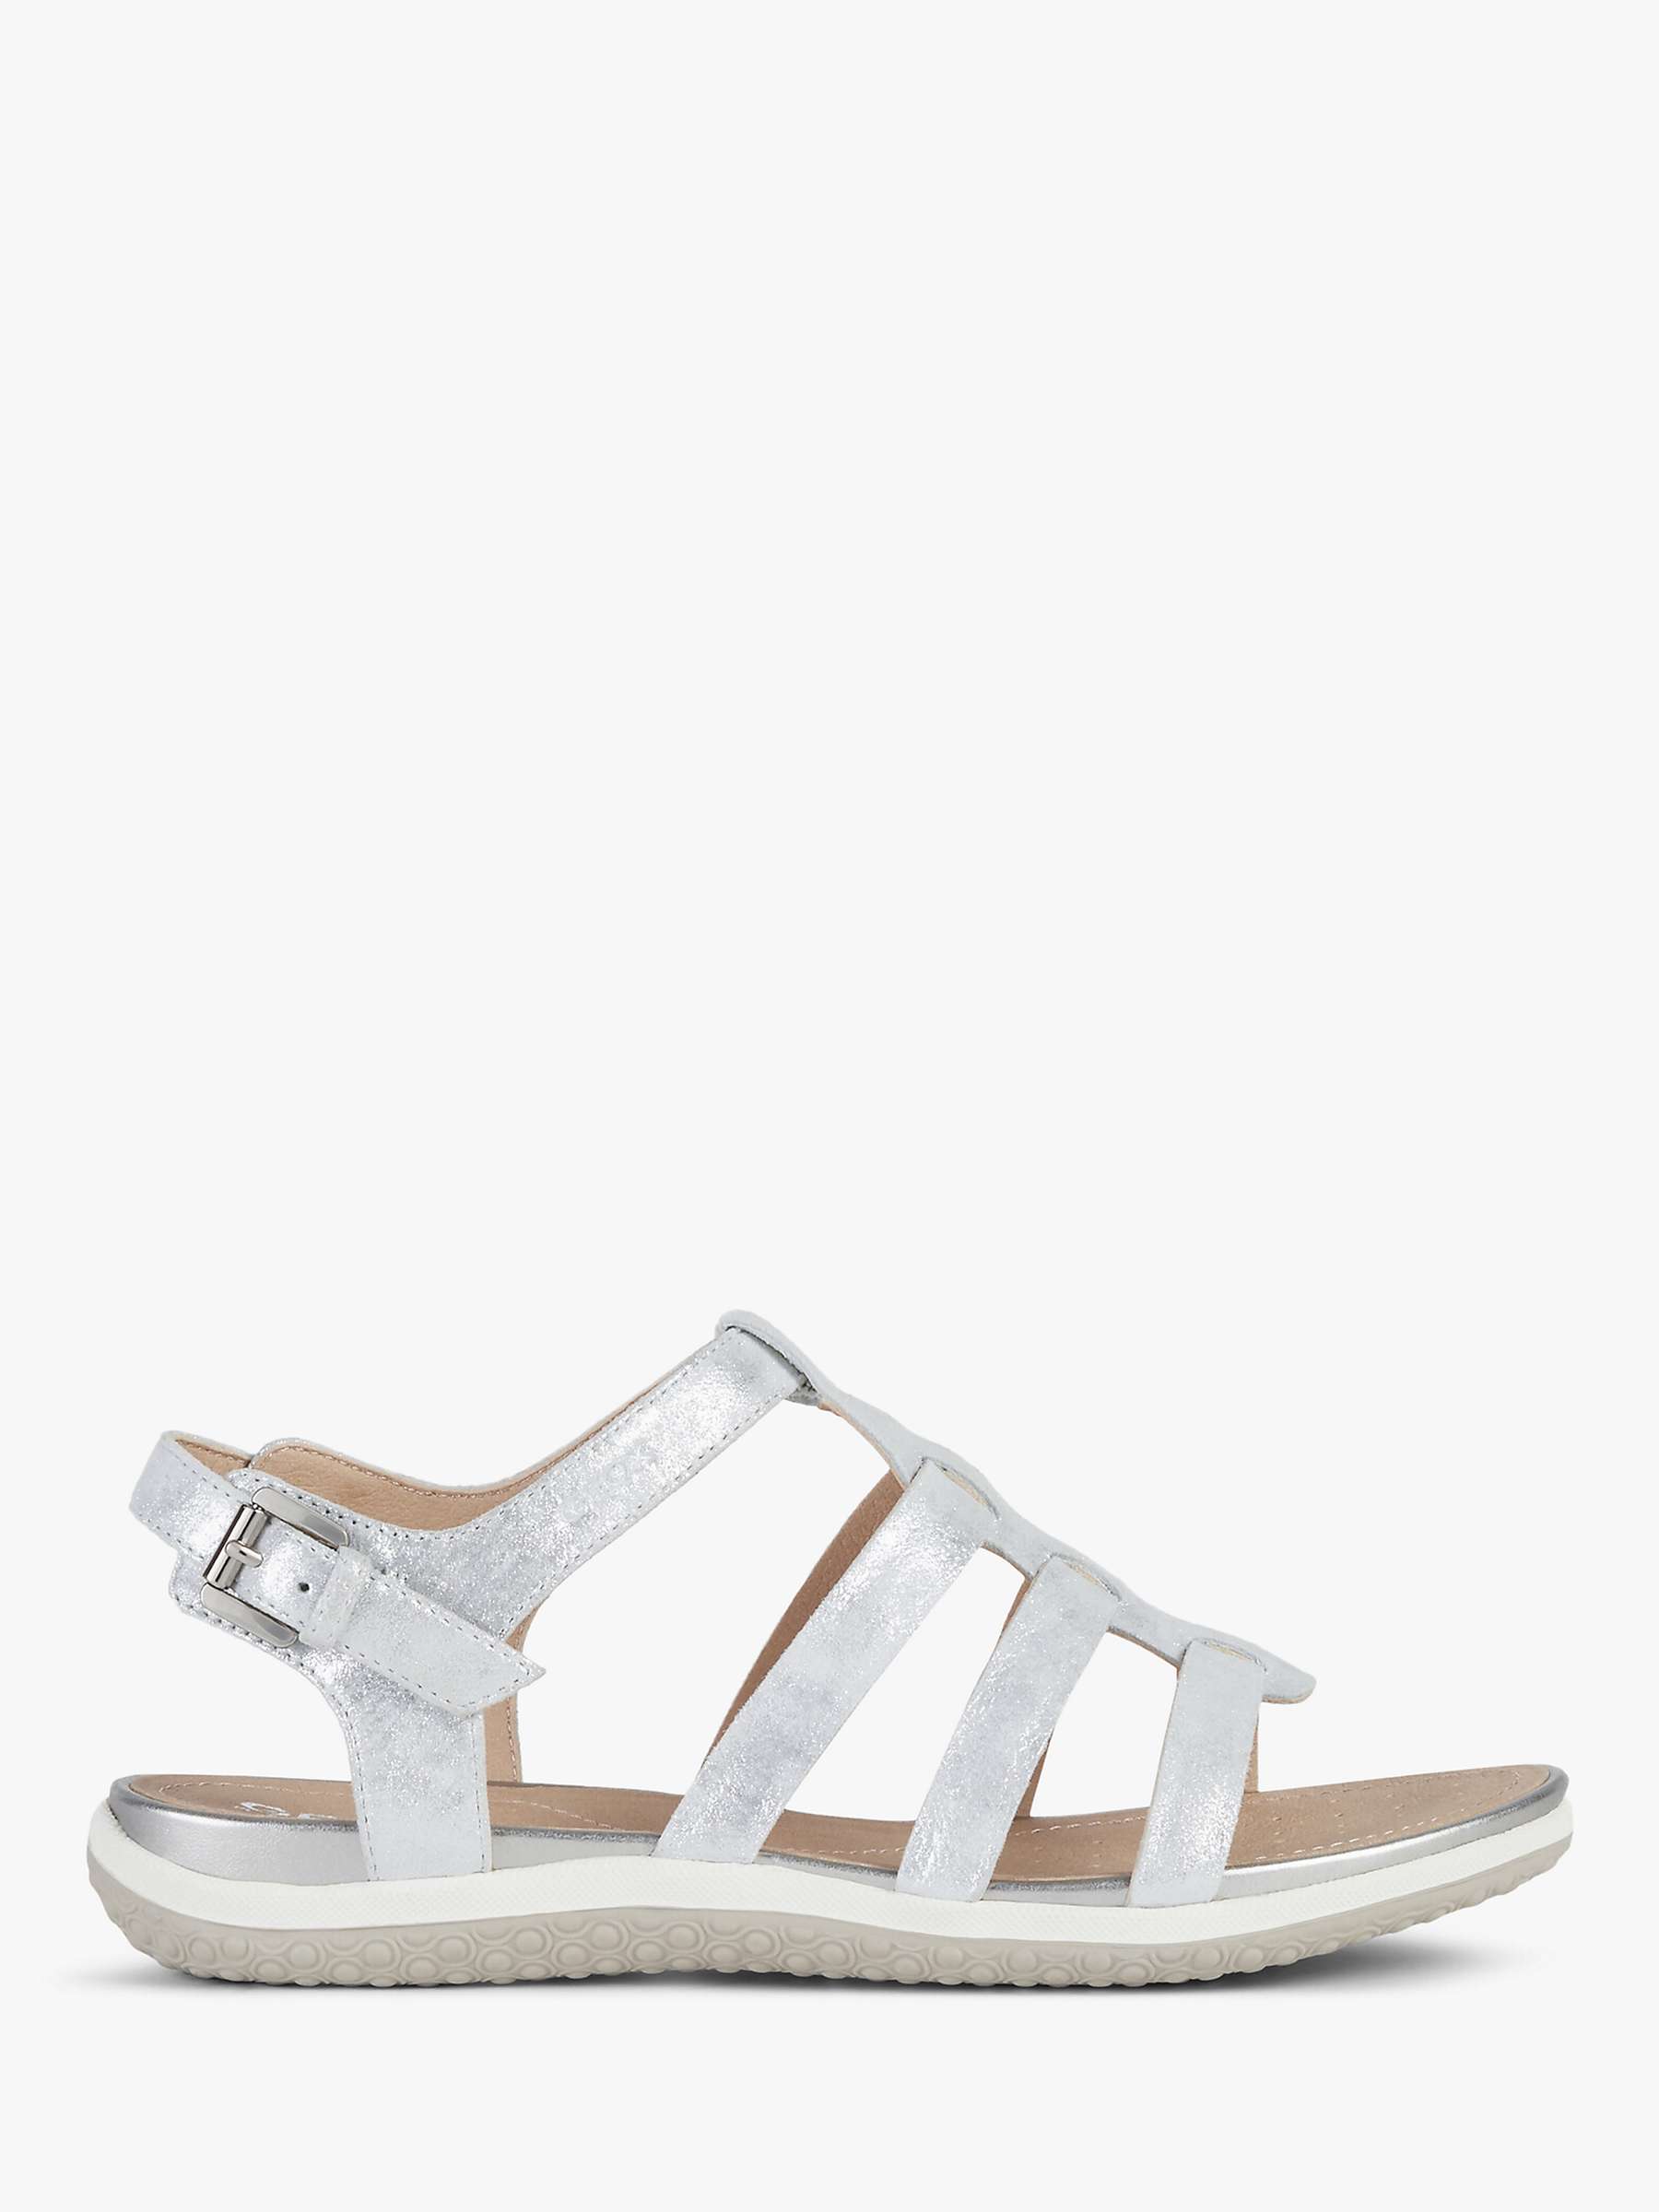 Buy Geox Women's Vega Wide Fit Leather Sandals Online at johnlewis.com